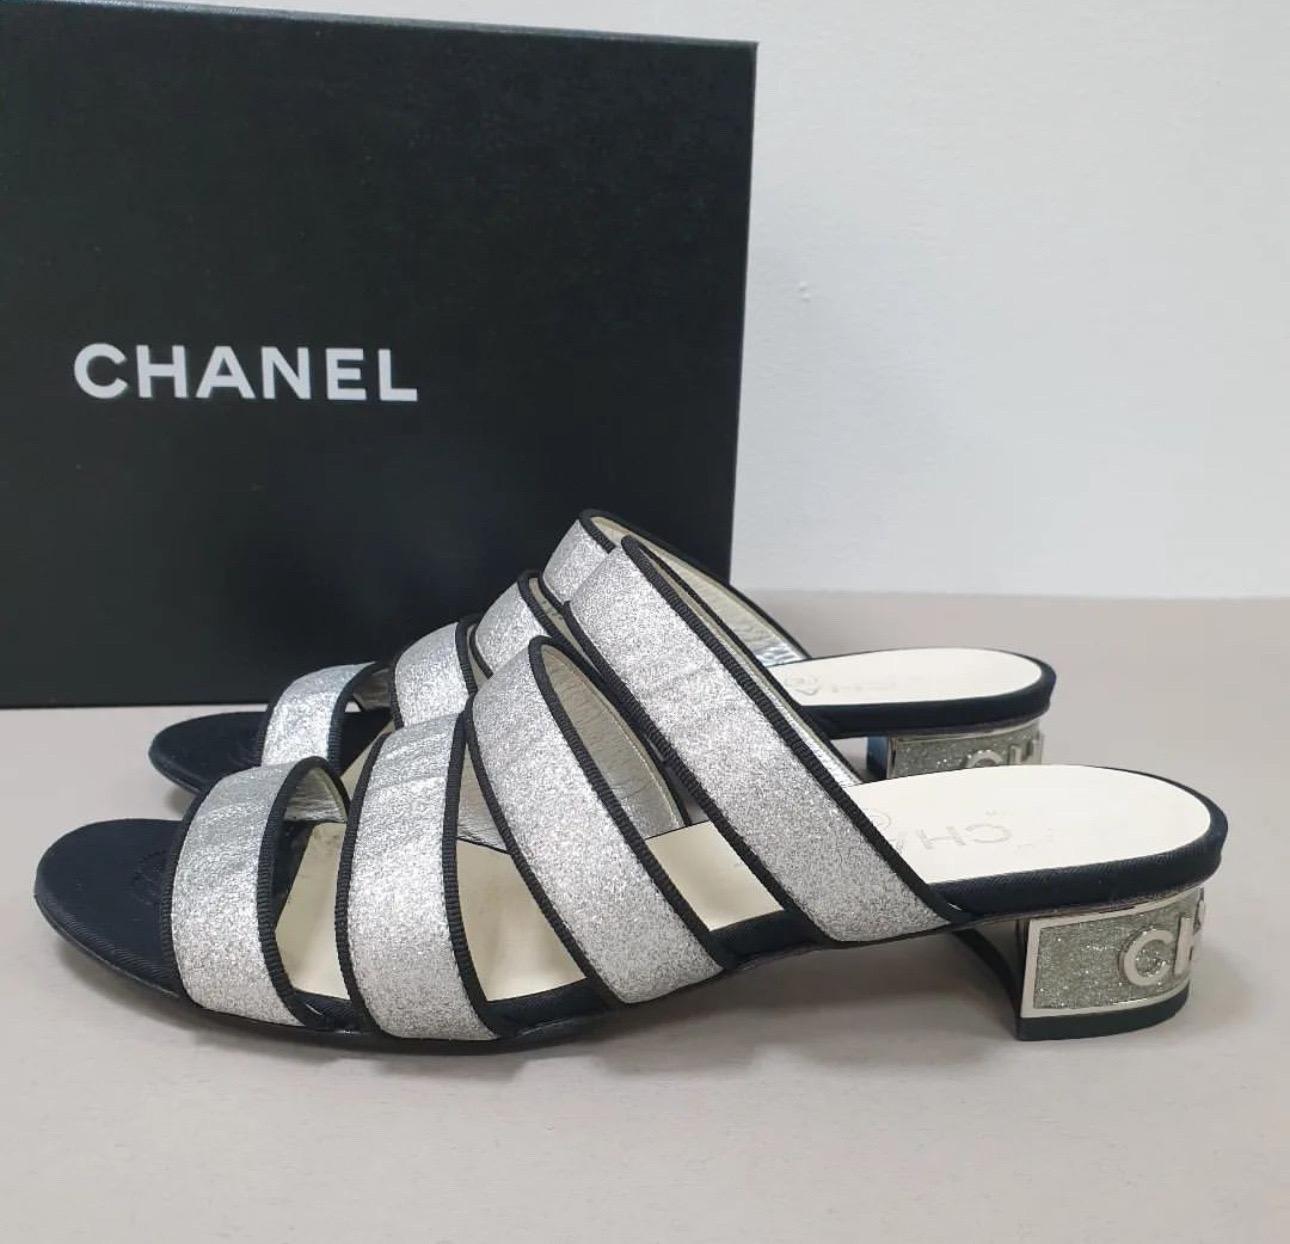 Chanel 2018 Interlocking CC Logo Sandals Mules In Good Condition For Sale In Krakow, PL